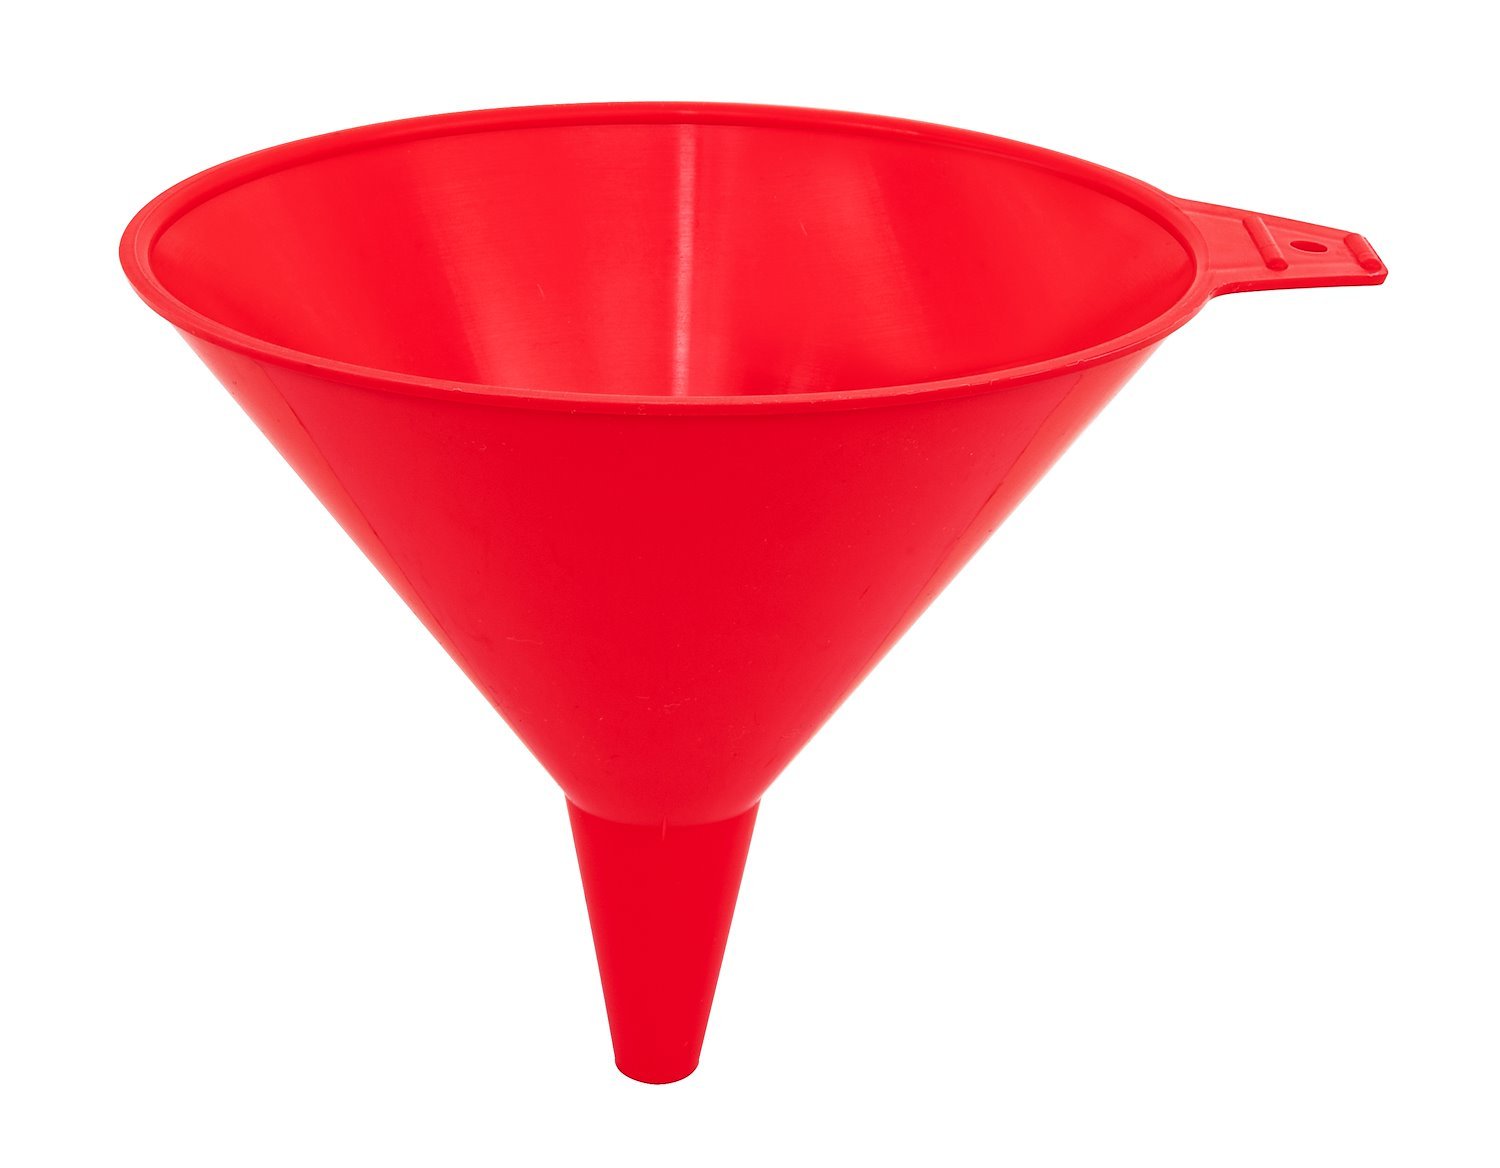 Funnel [8.5 in. Overall Length]